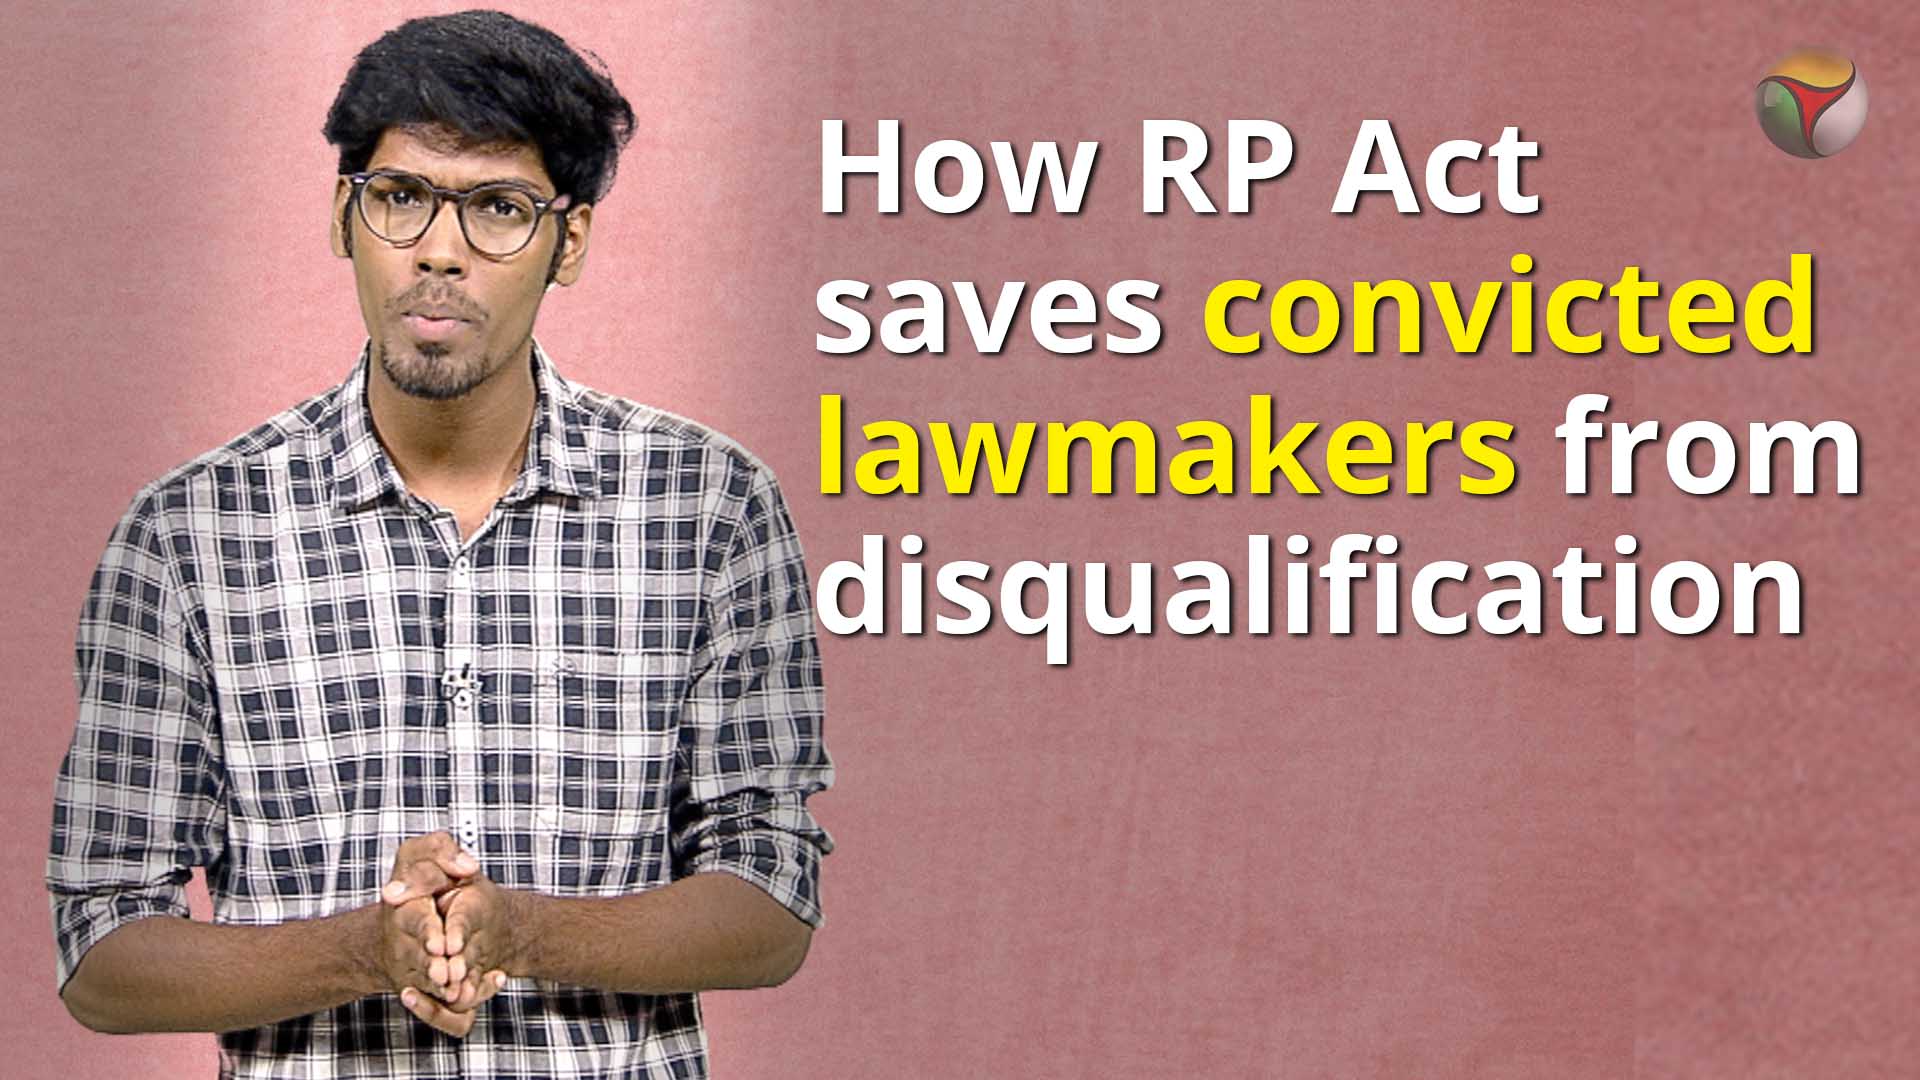 How RP Act saves convicted lawmakers from disqualification